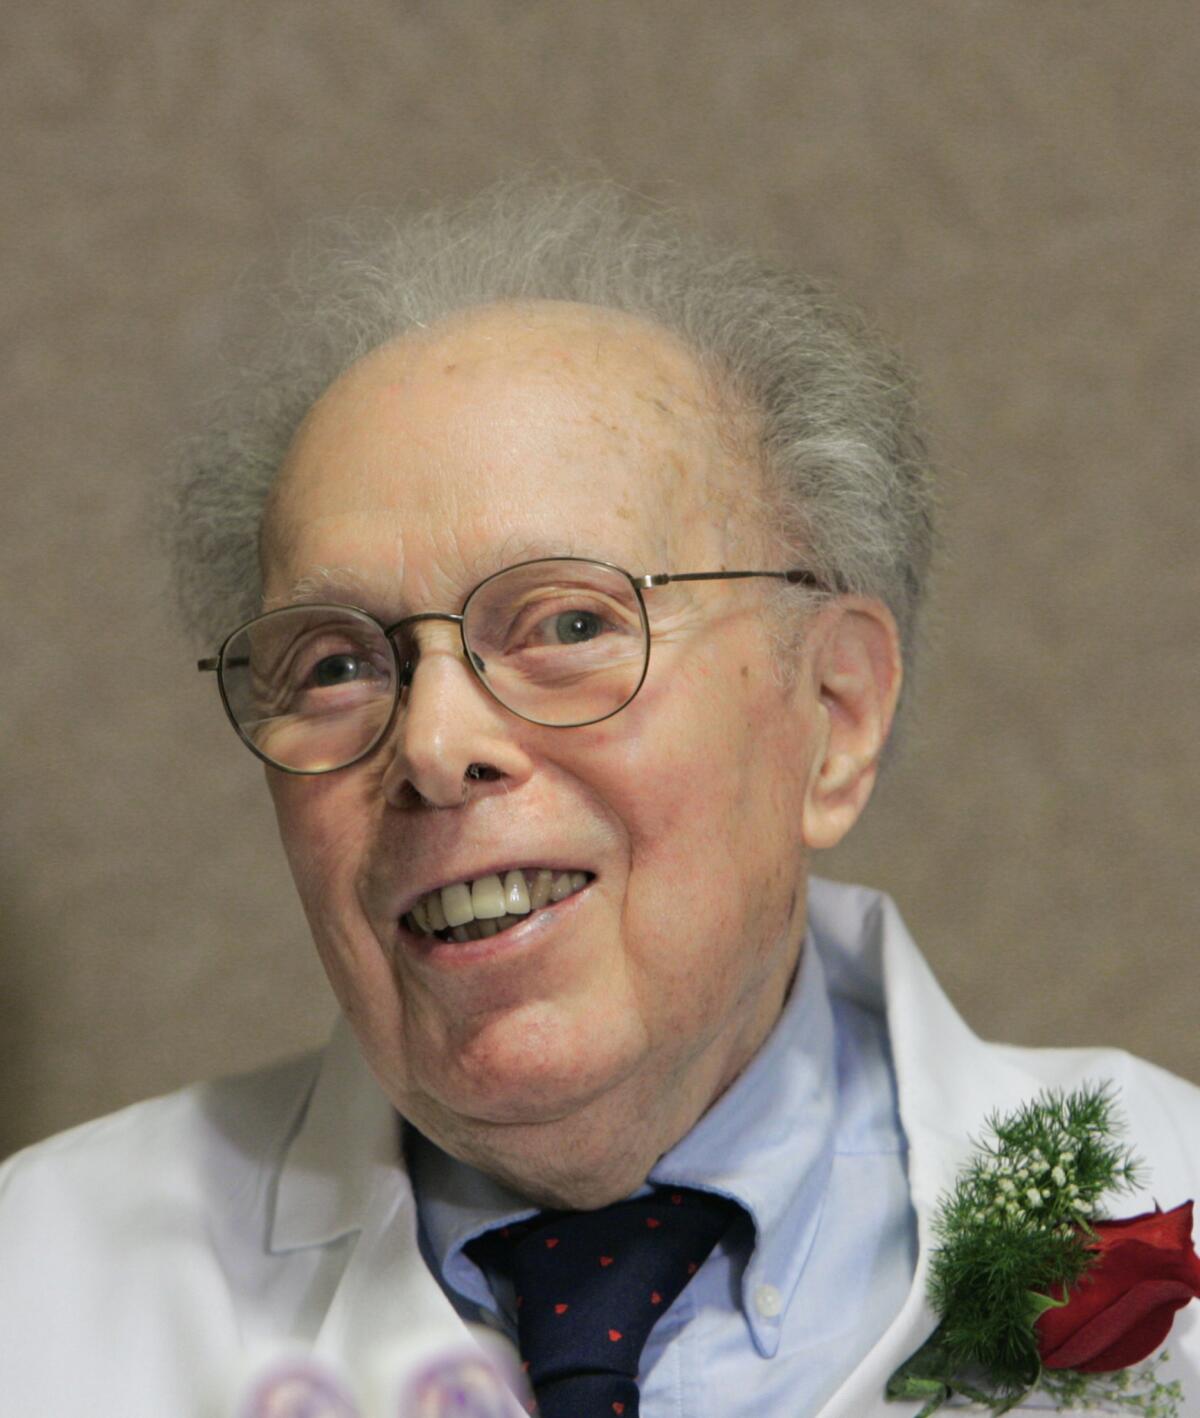 Dr. Denham Harman, pictured at his 90th birthday party in 2006, developed the most widely accepted theory on aging that's used to study cancer and other diseases.